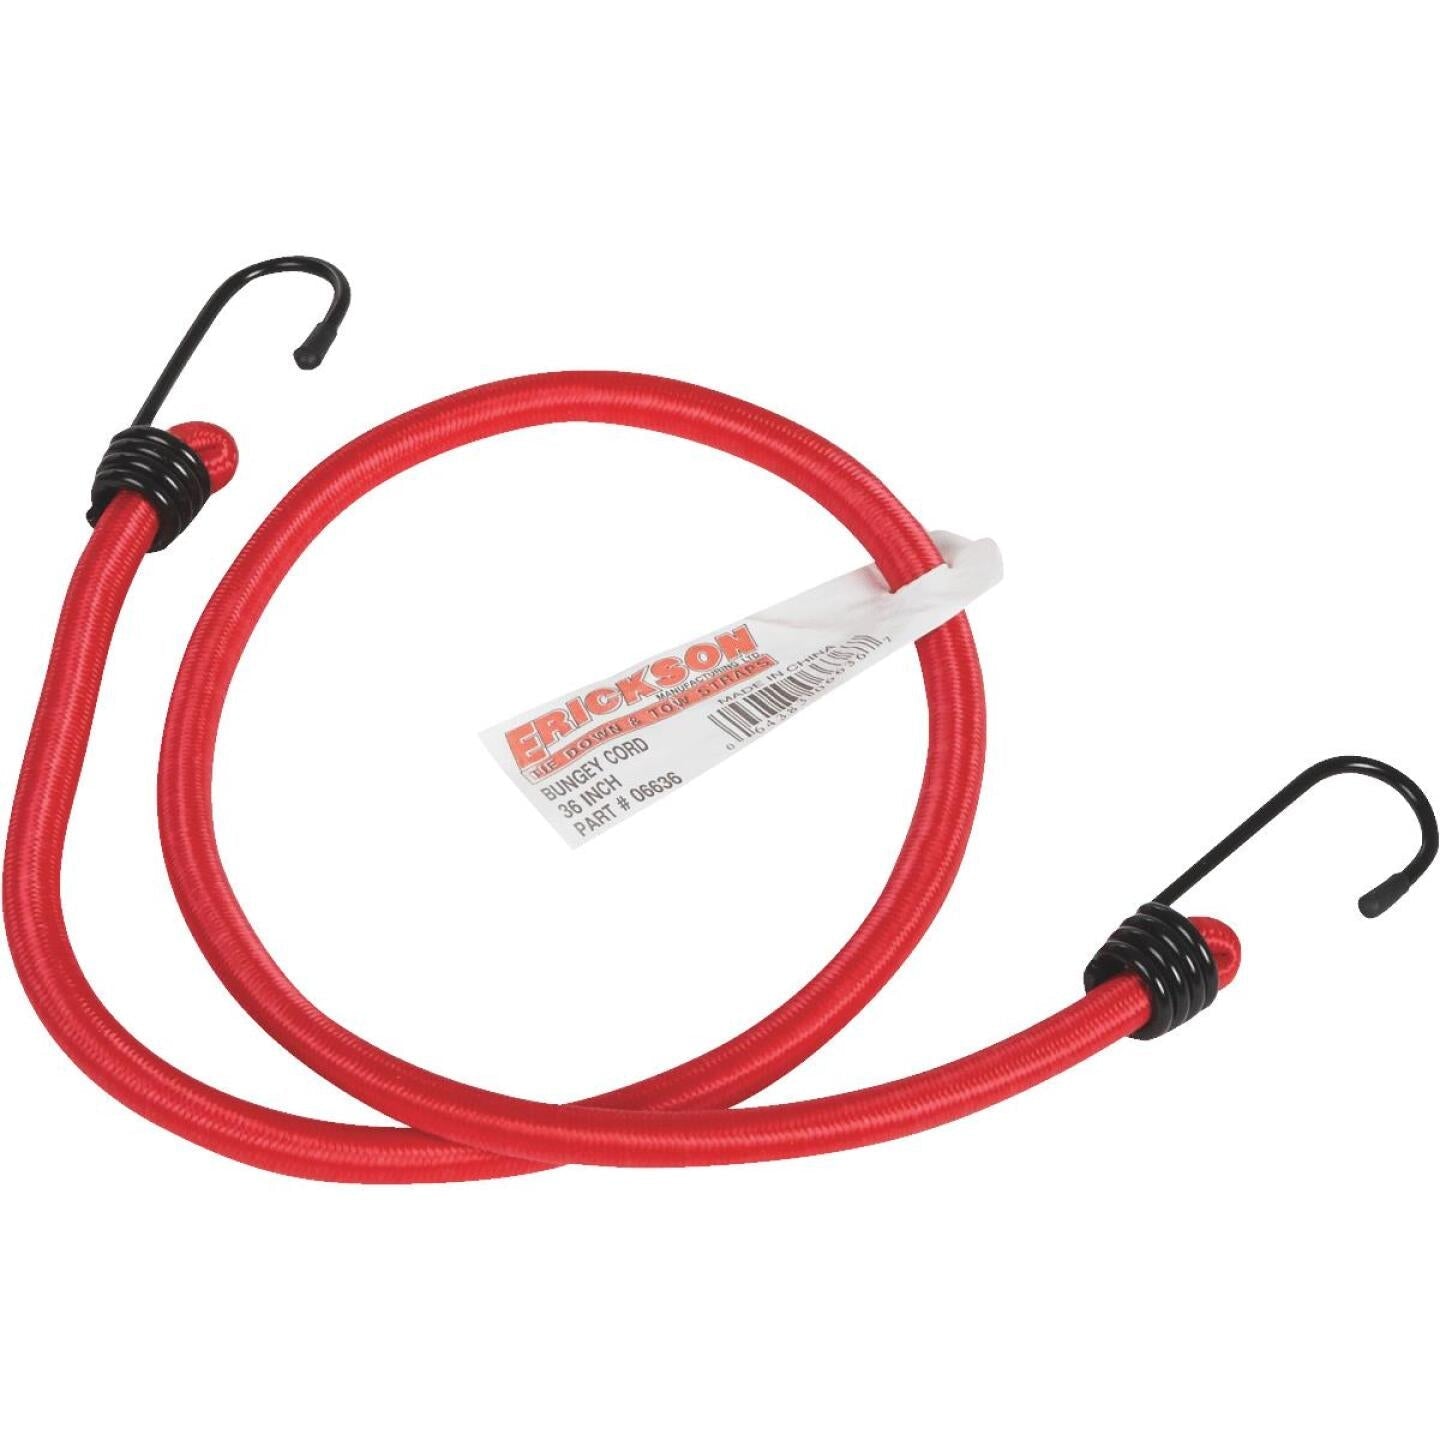 Erickson, Erickson 1/4 In. x 36 In. Bungee Cord, Assorted Colors